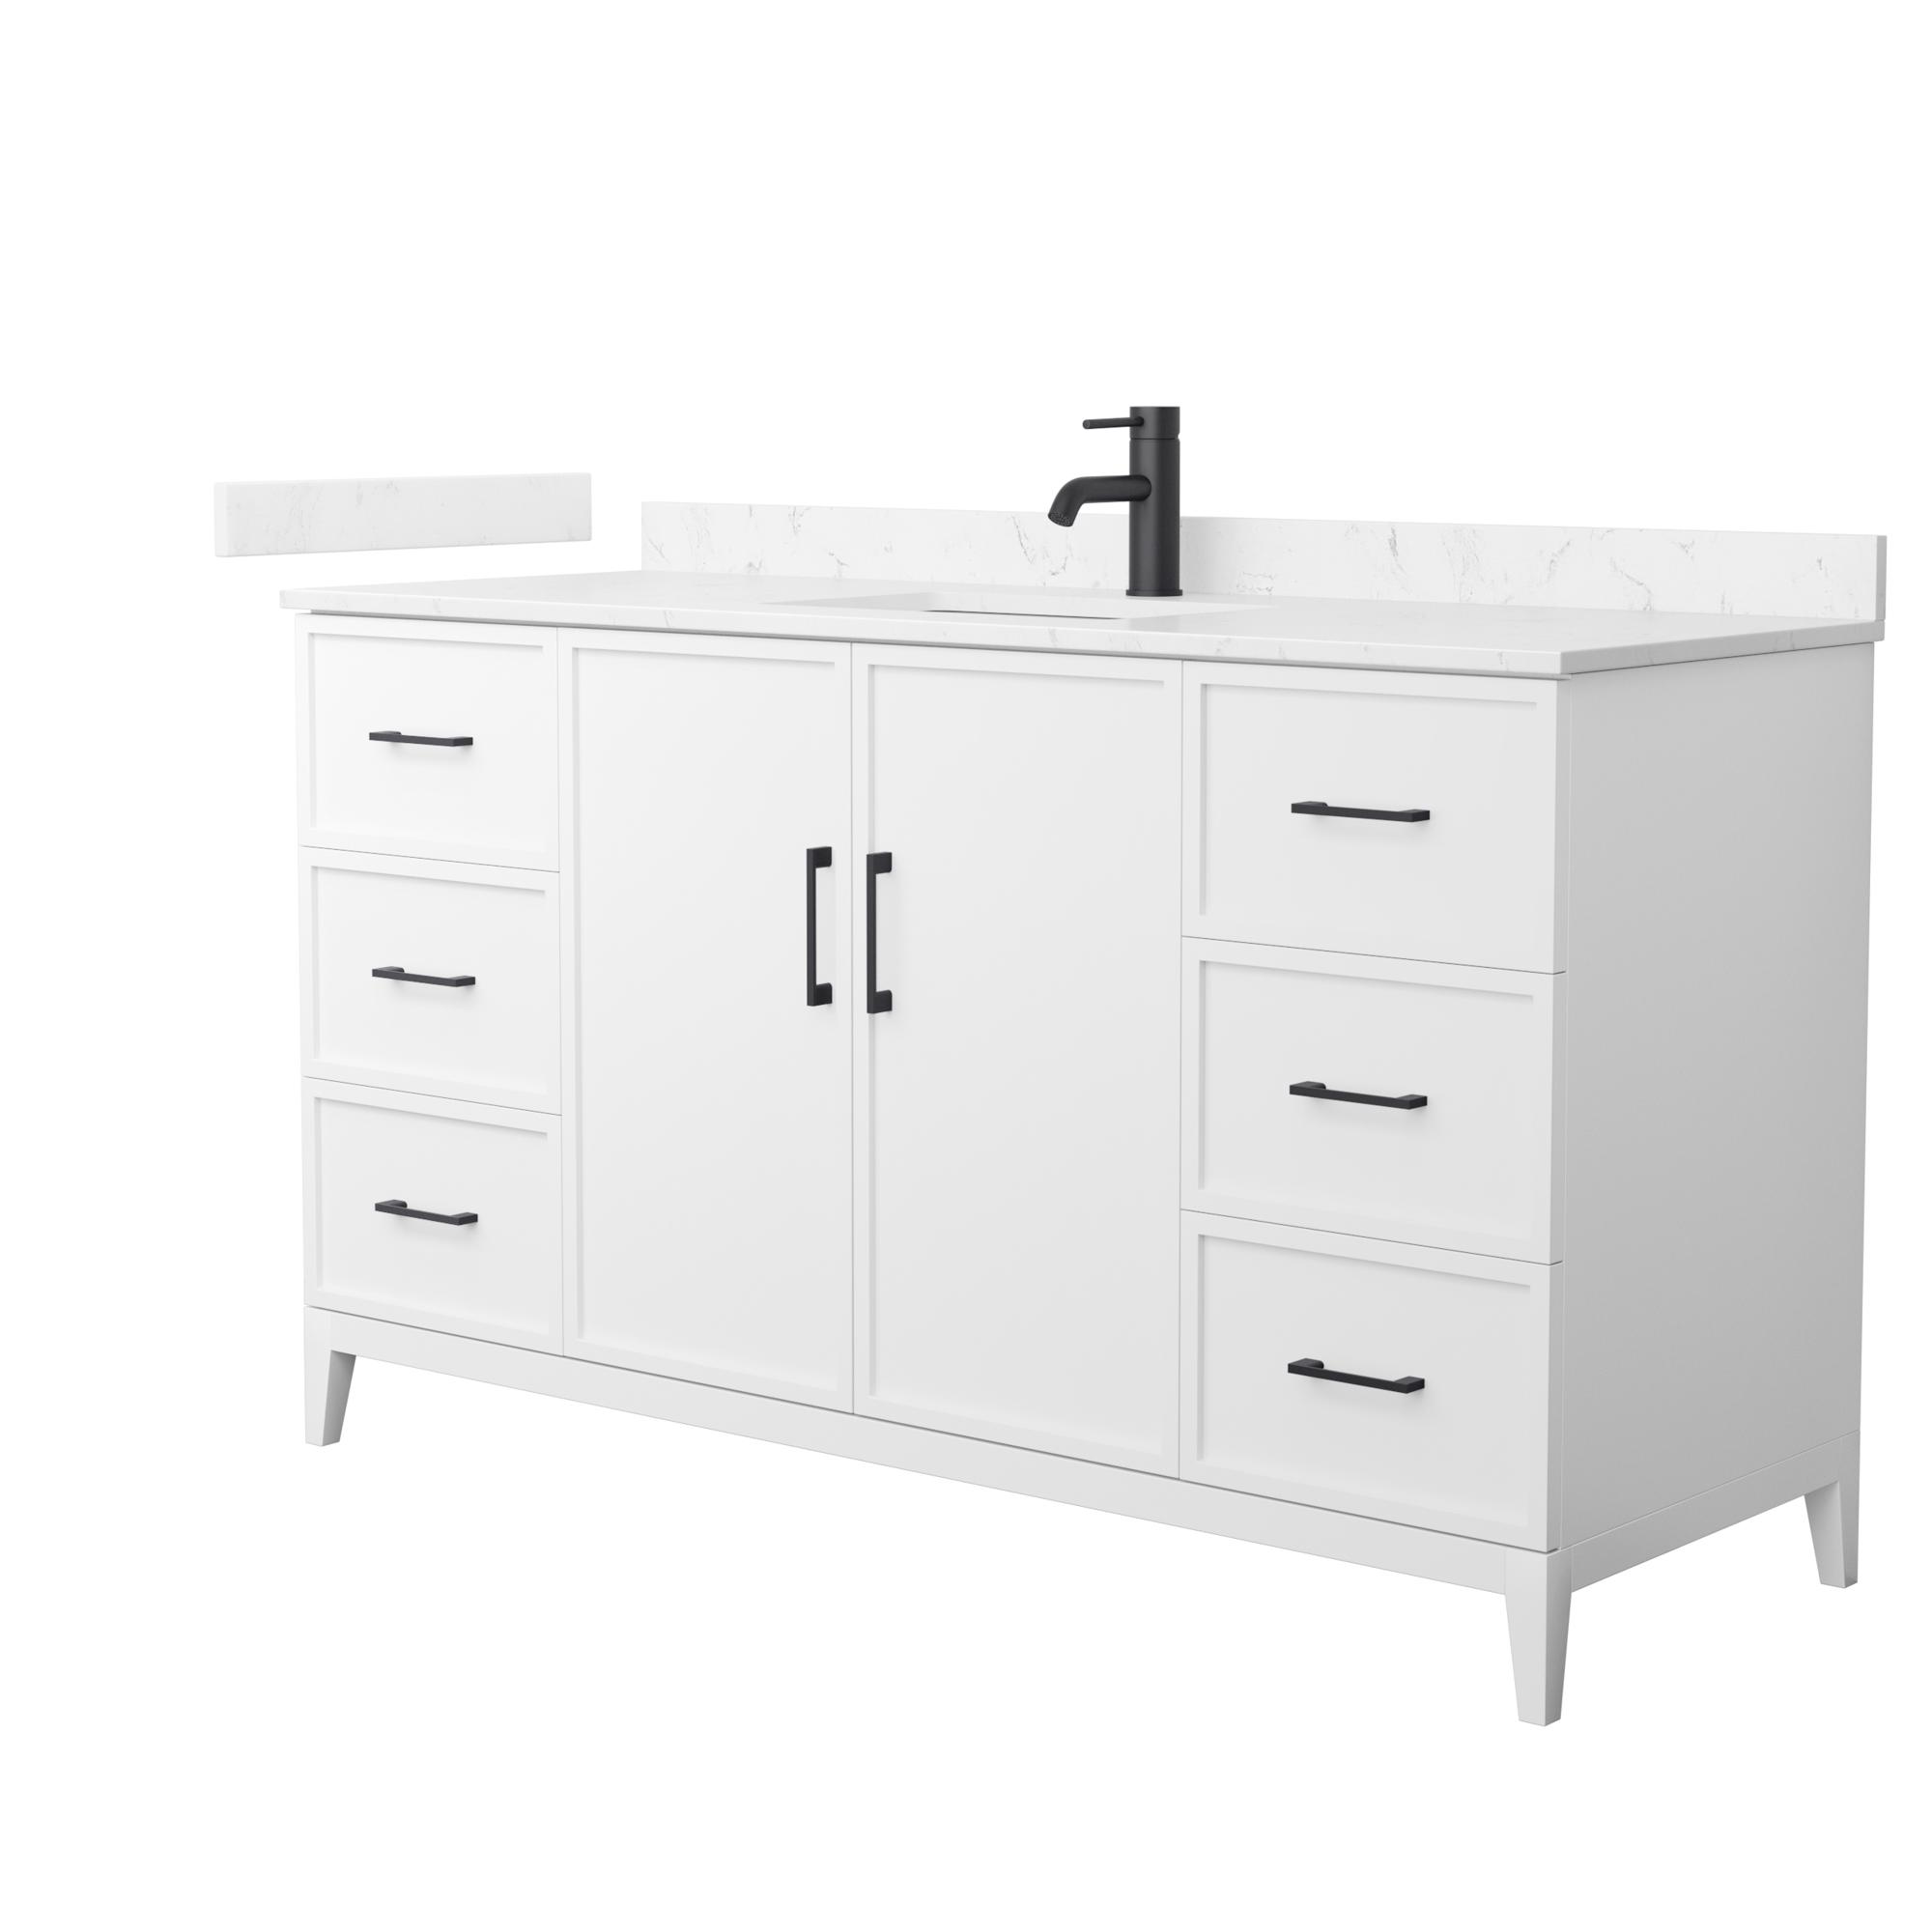 60" Transitional Single Vanity Base in White, 7 Top Options with 2 Hardware Option